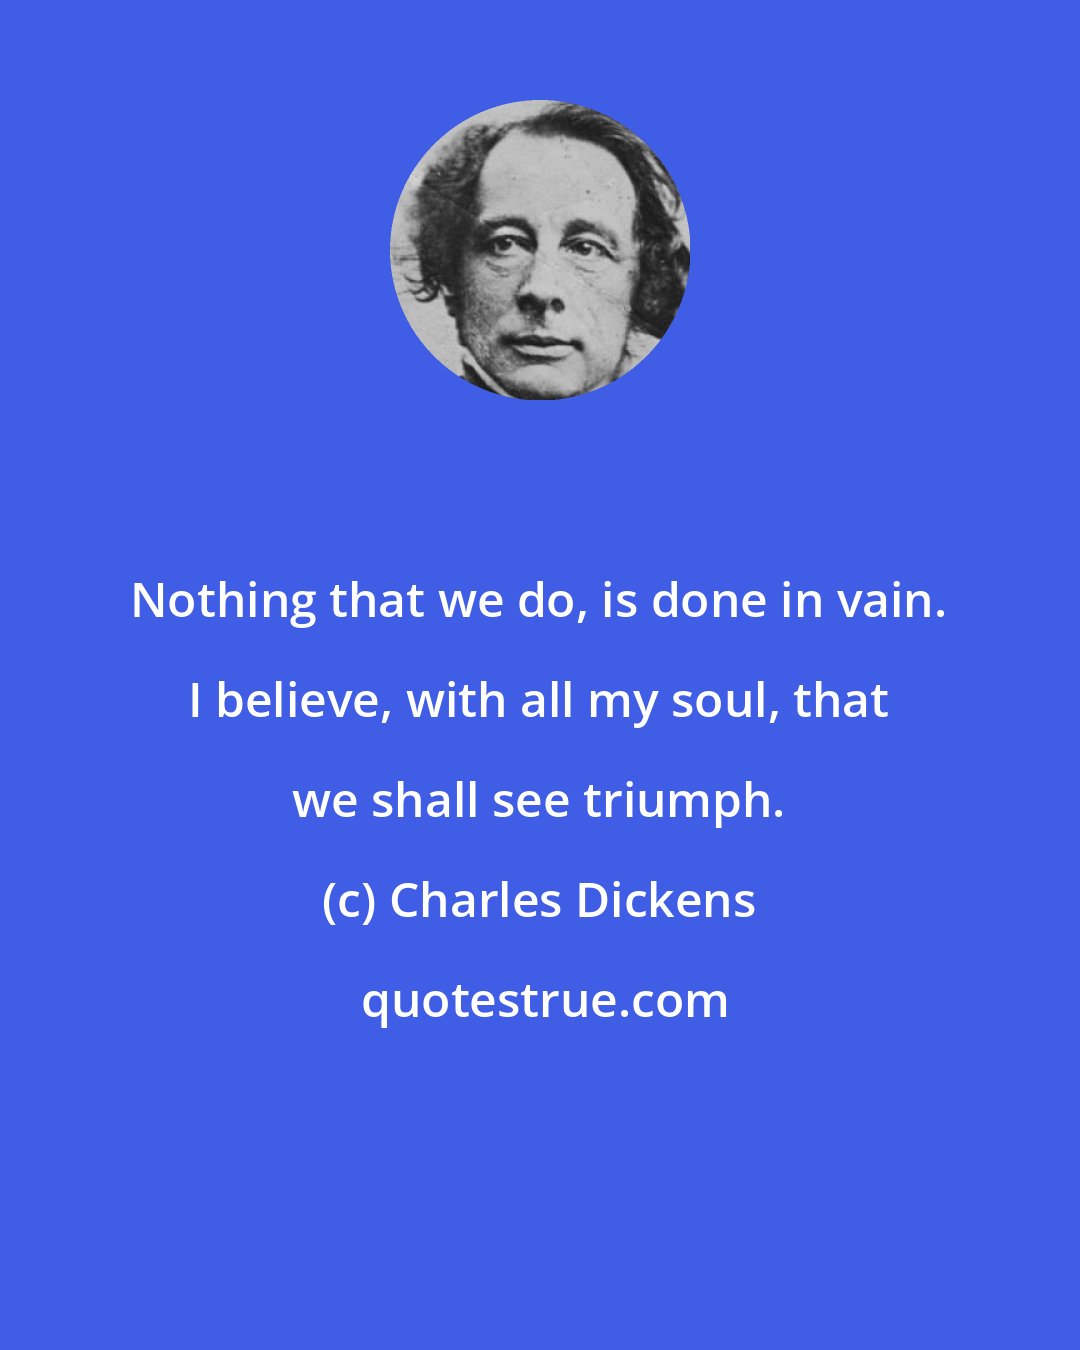 Charles Dickens: Nothing that we do, is done in vain. I believe, with all my soul, that we shall see triumph.